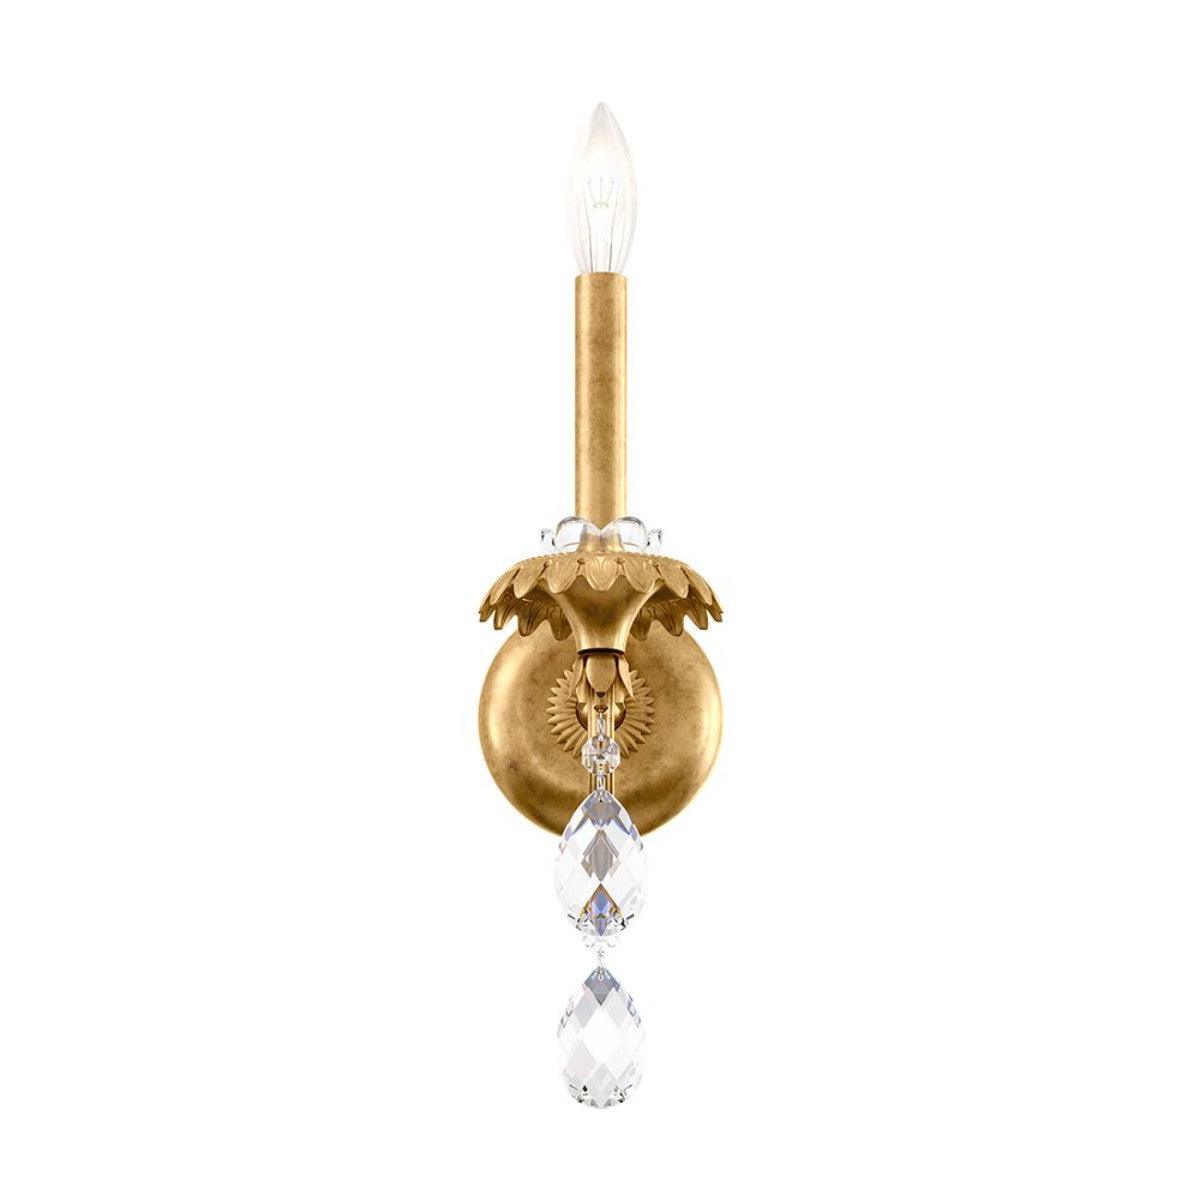 Helenia 17 inch Armed Sconce with Clear Heritage Crystals